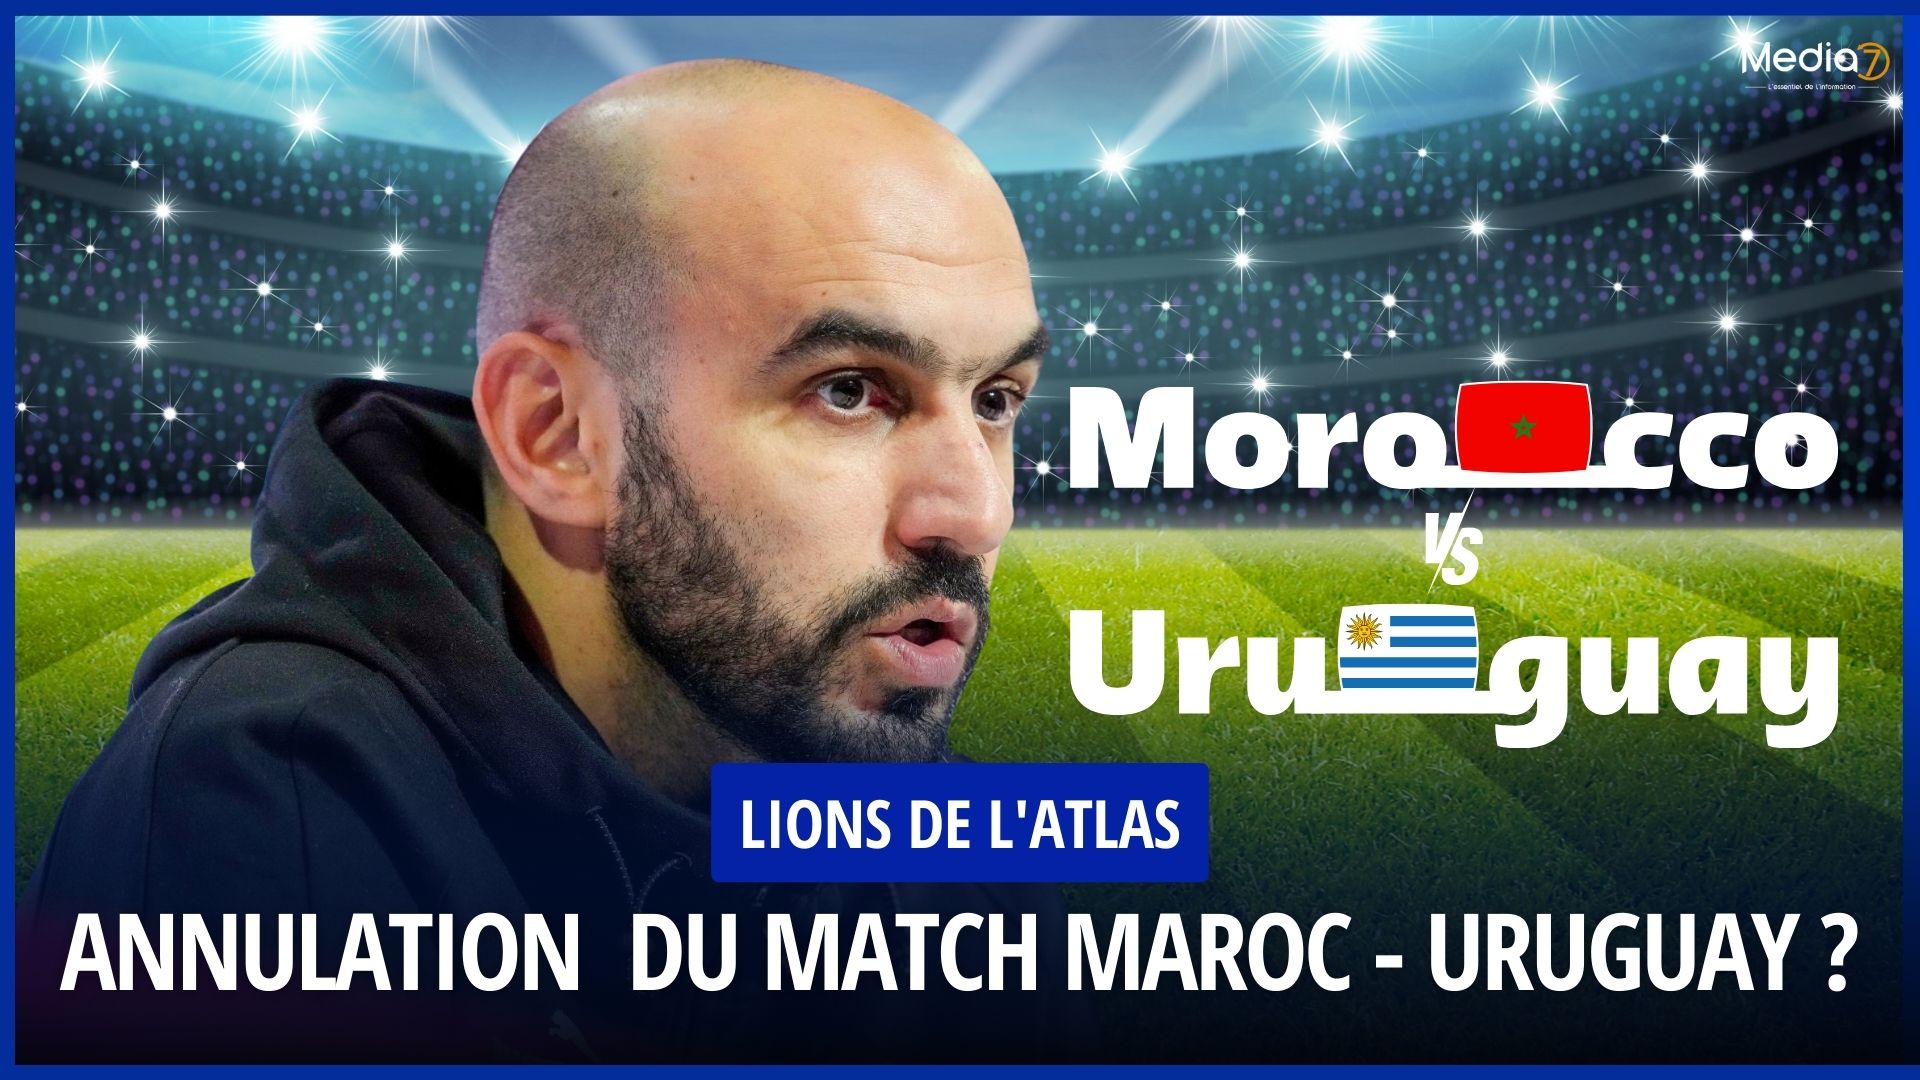 Was the match between the Moroccan and Uruguay national teams cancelled?